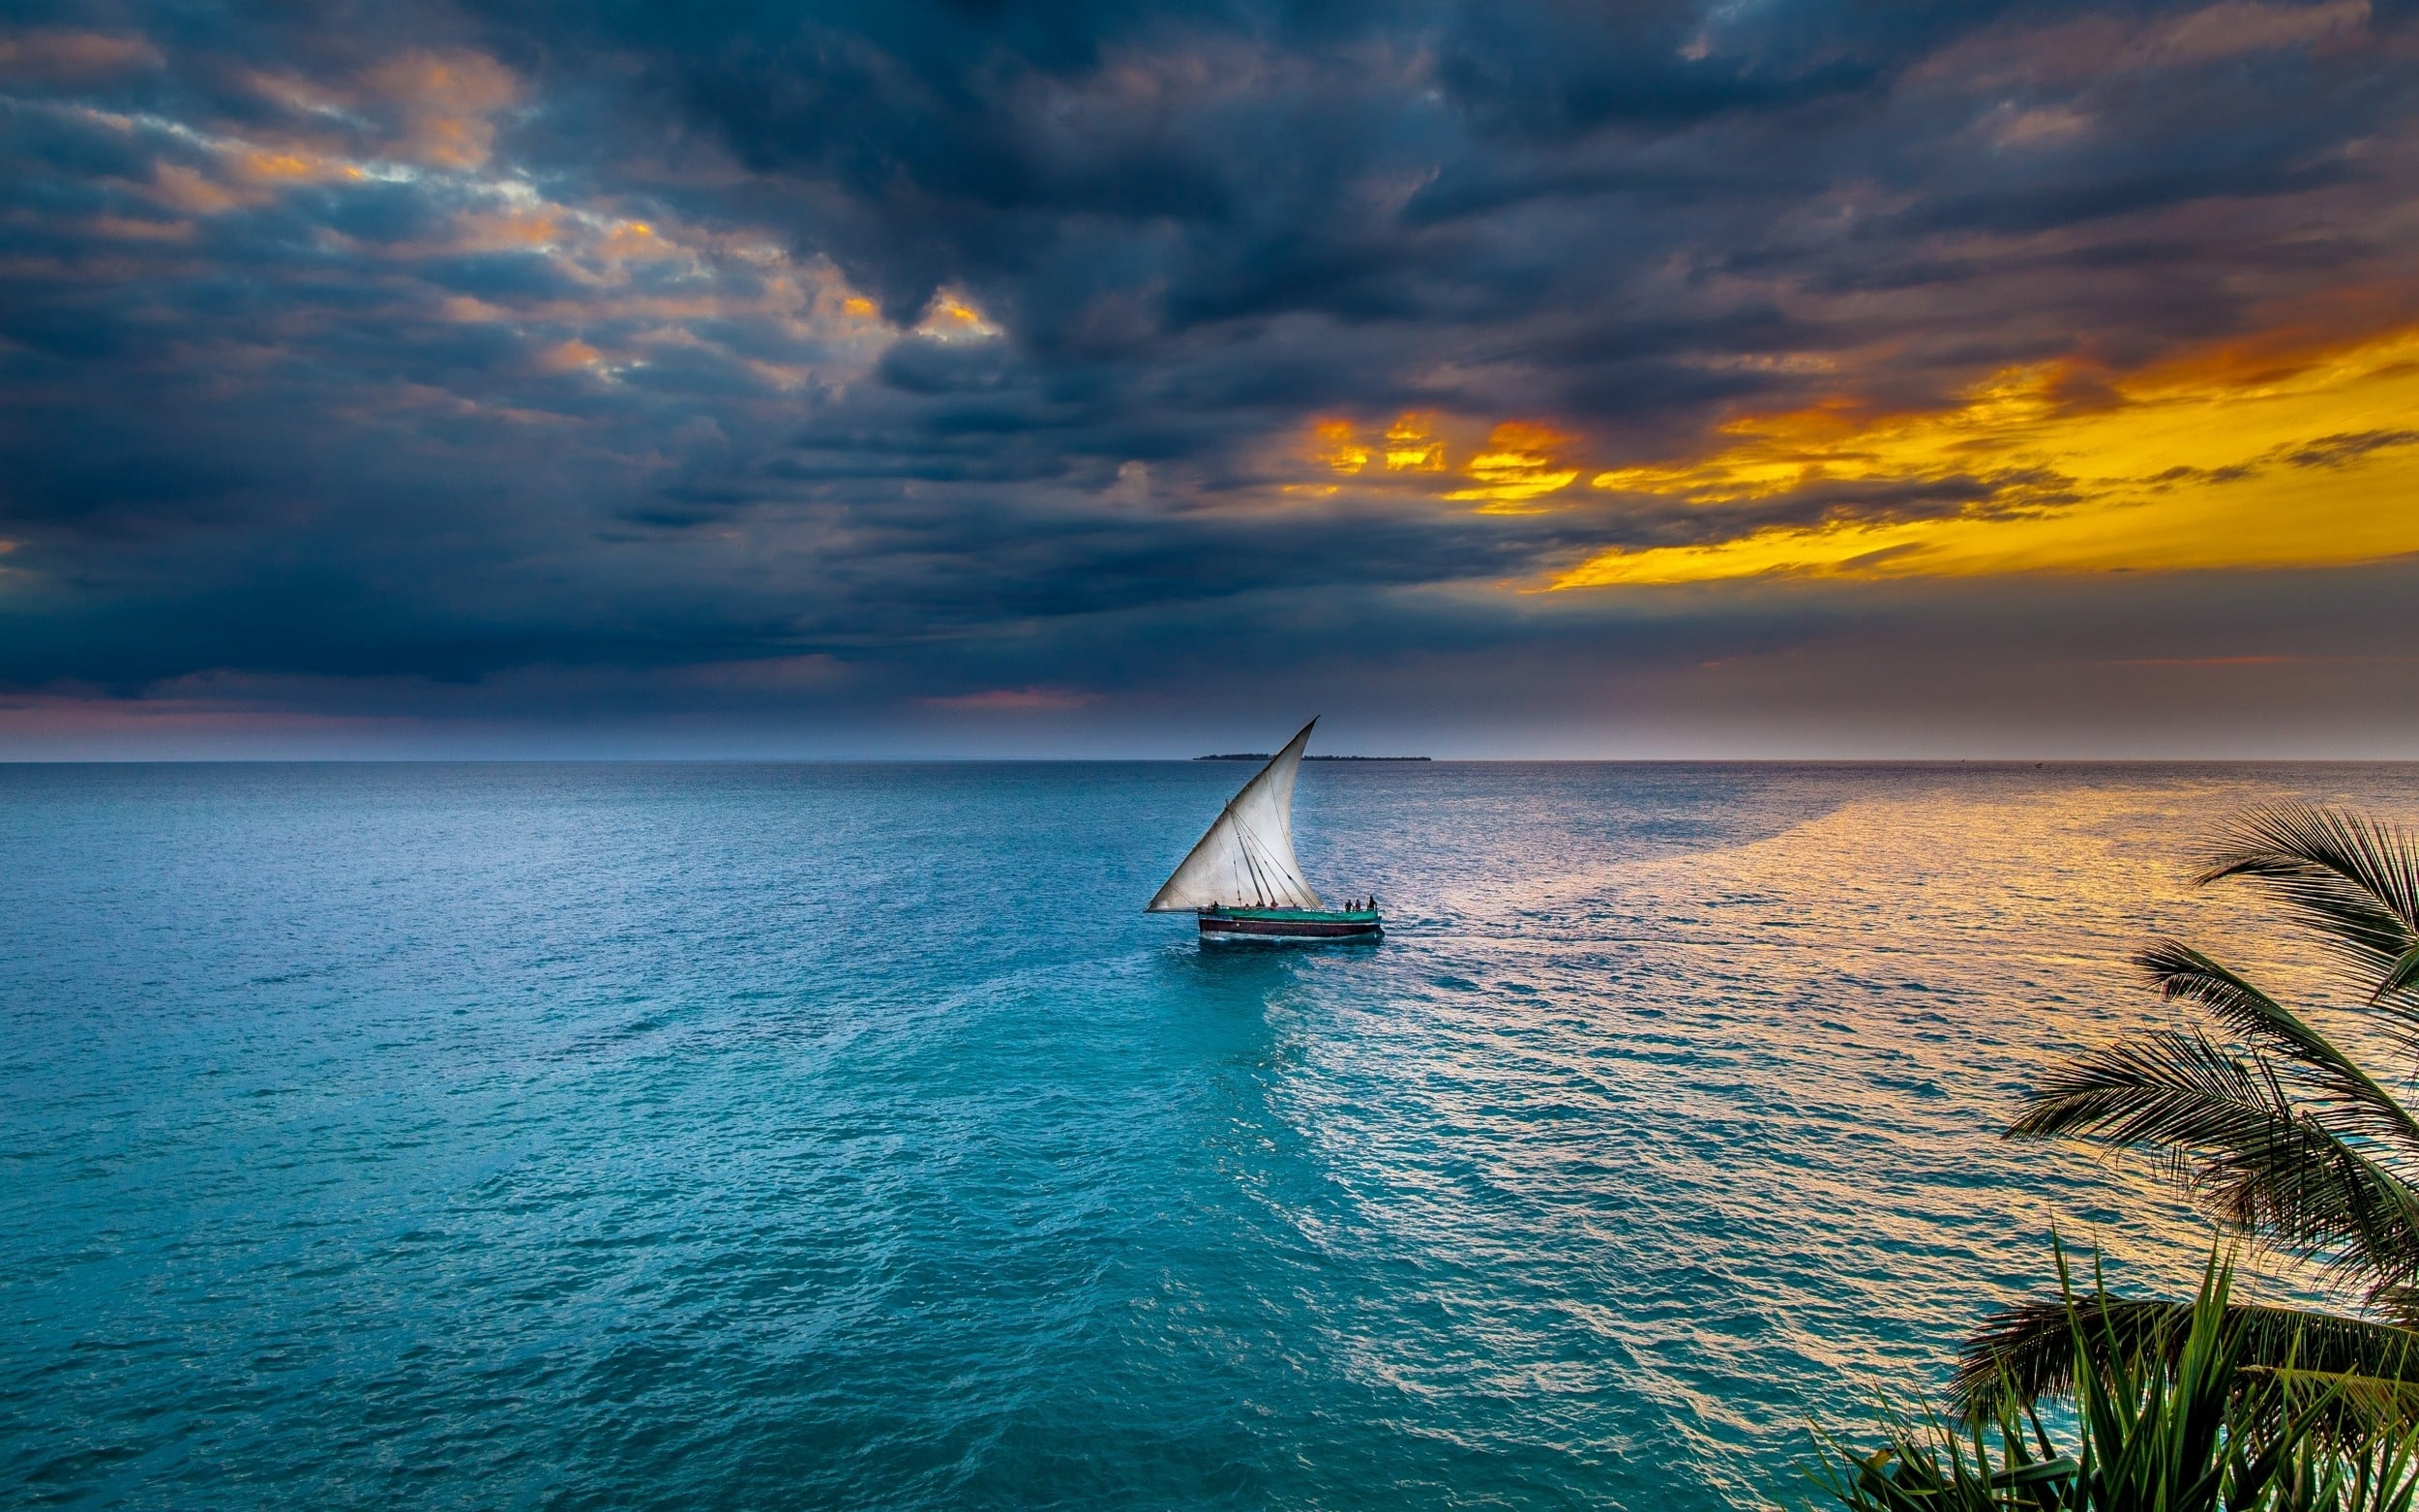 pictures of sailboats on the ocean